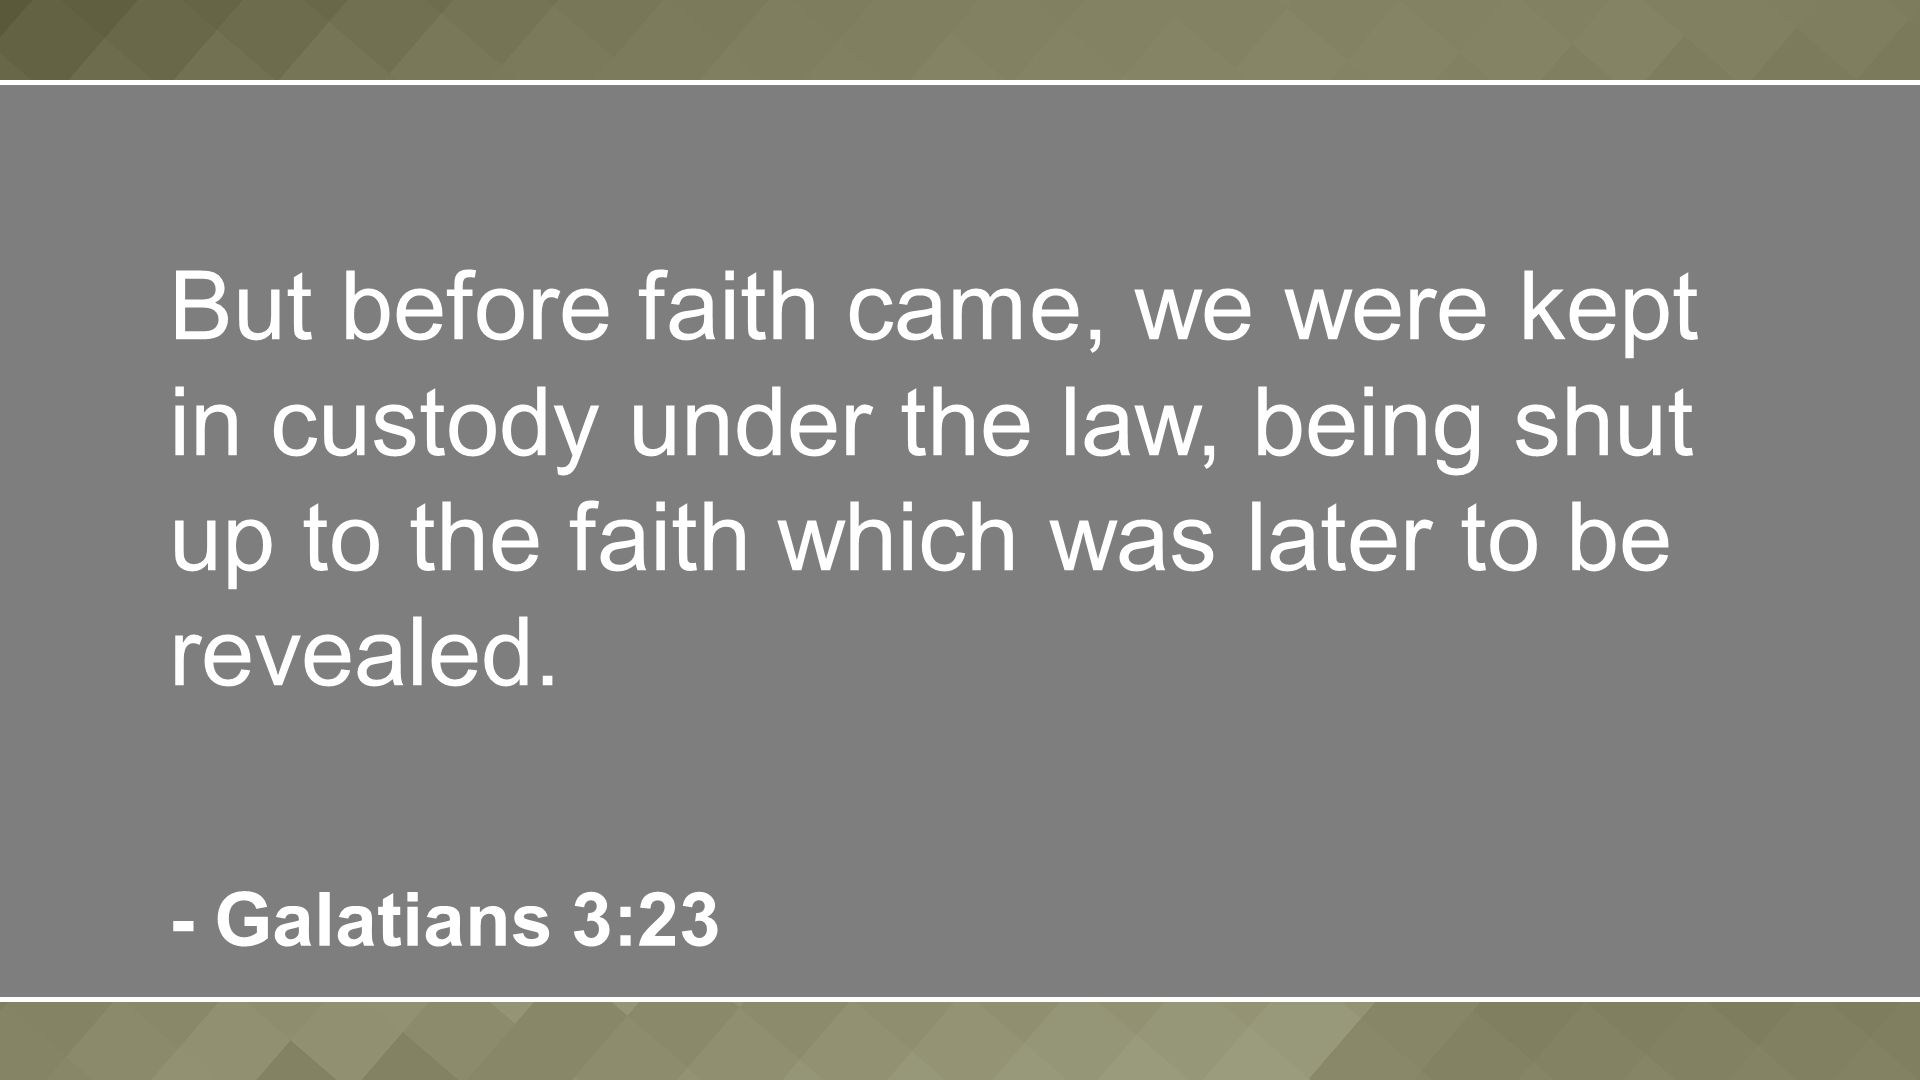 But before faith came, we were kept in custody under the law, being shut up to the faith which was later to be revealed.